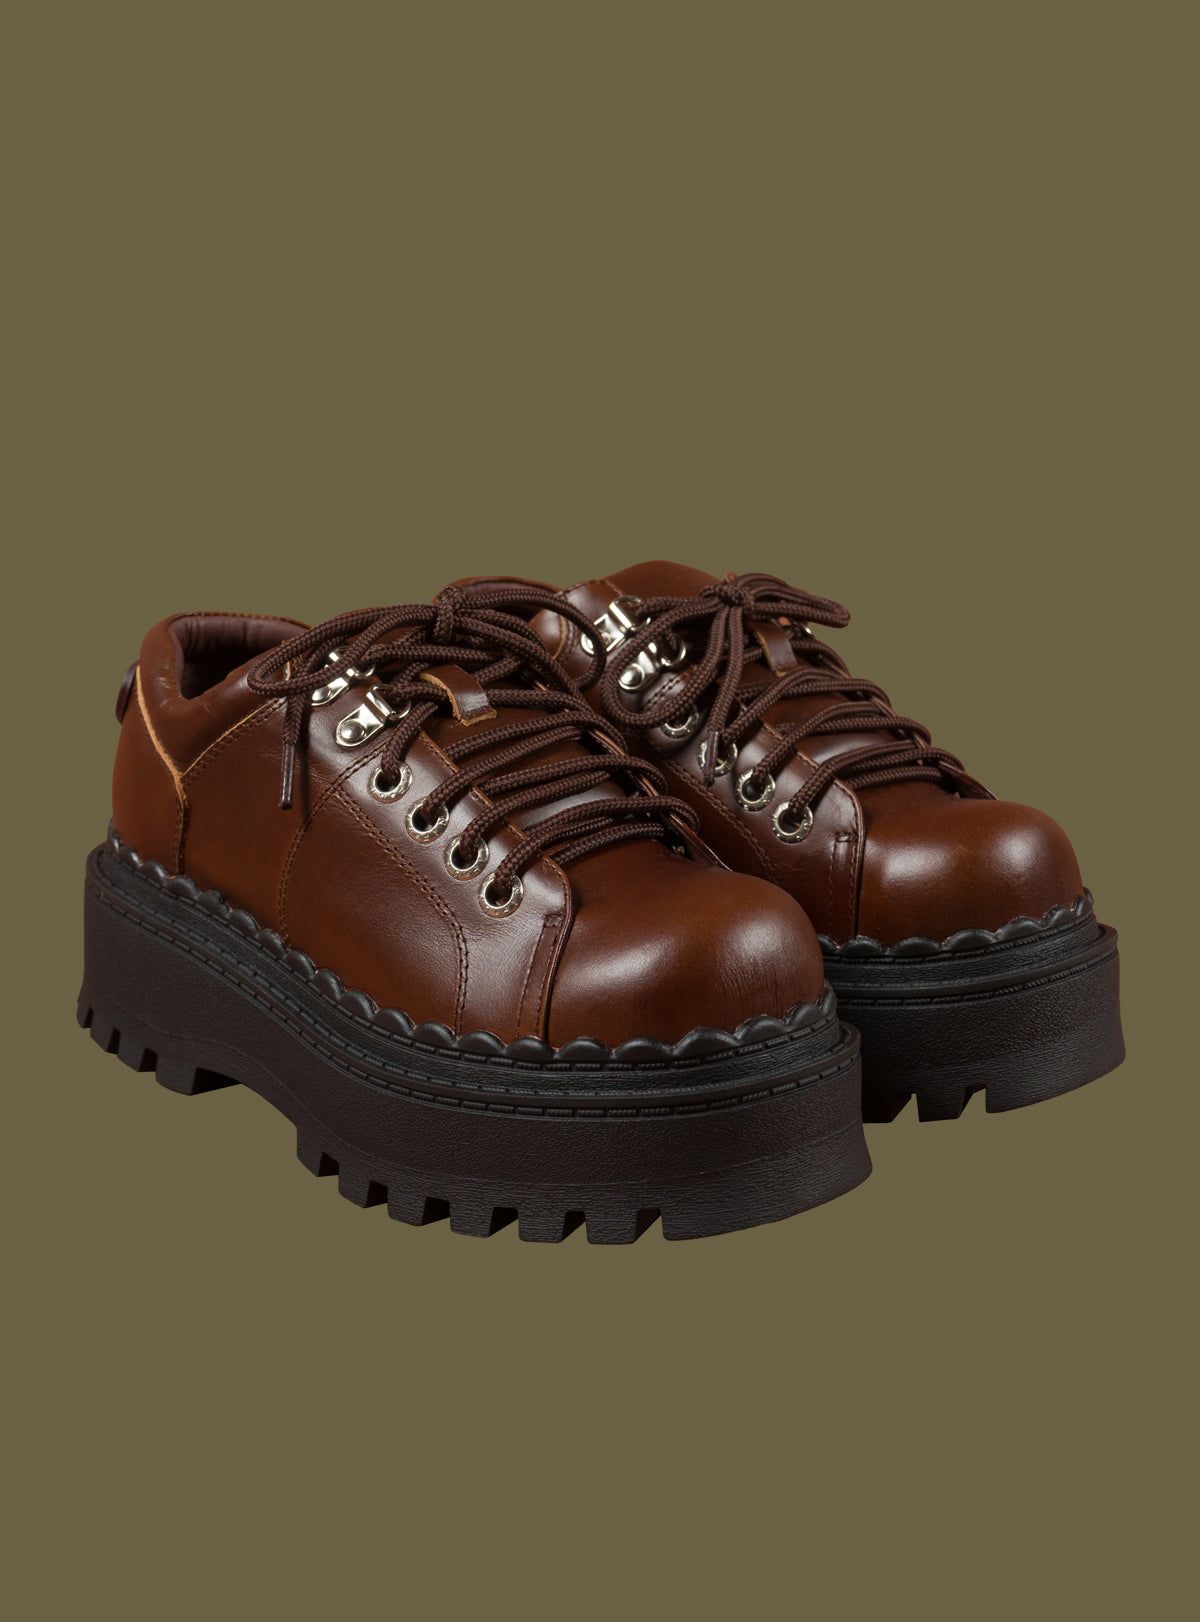 Brown shoes for everyday life